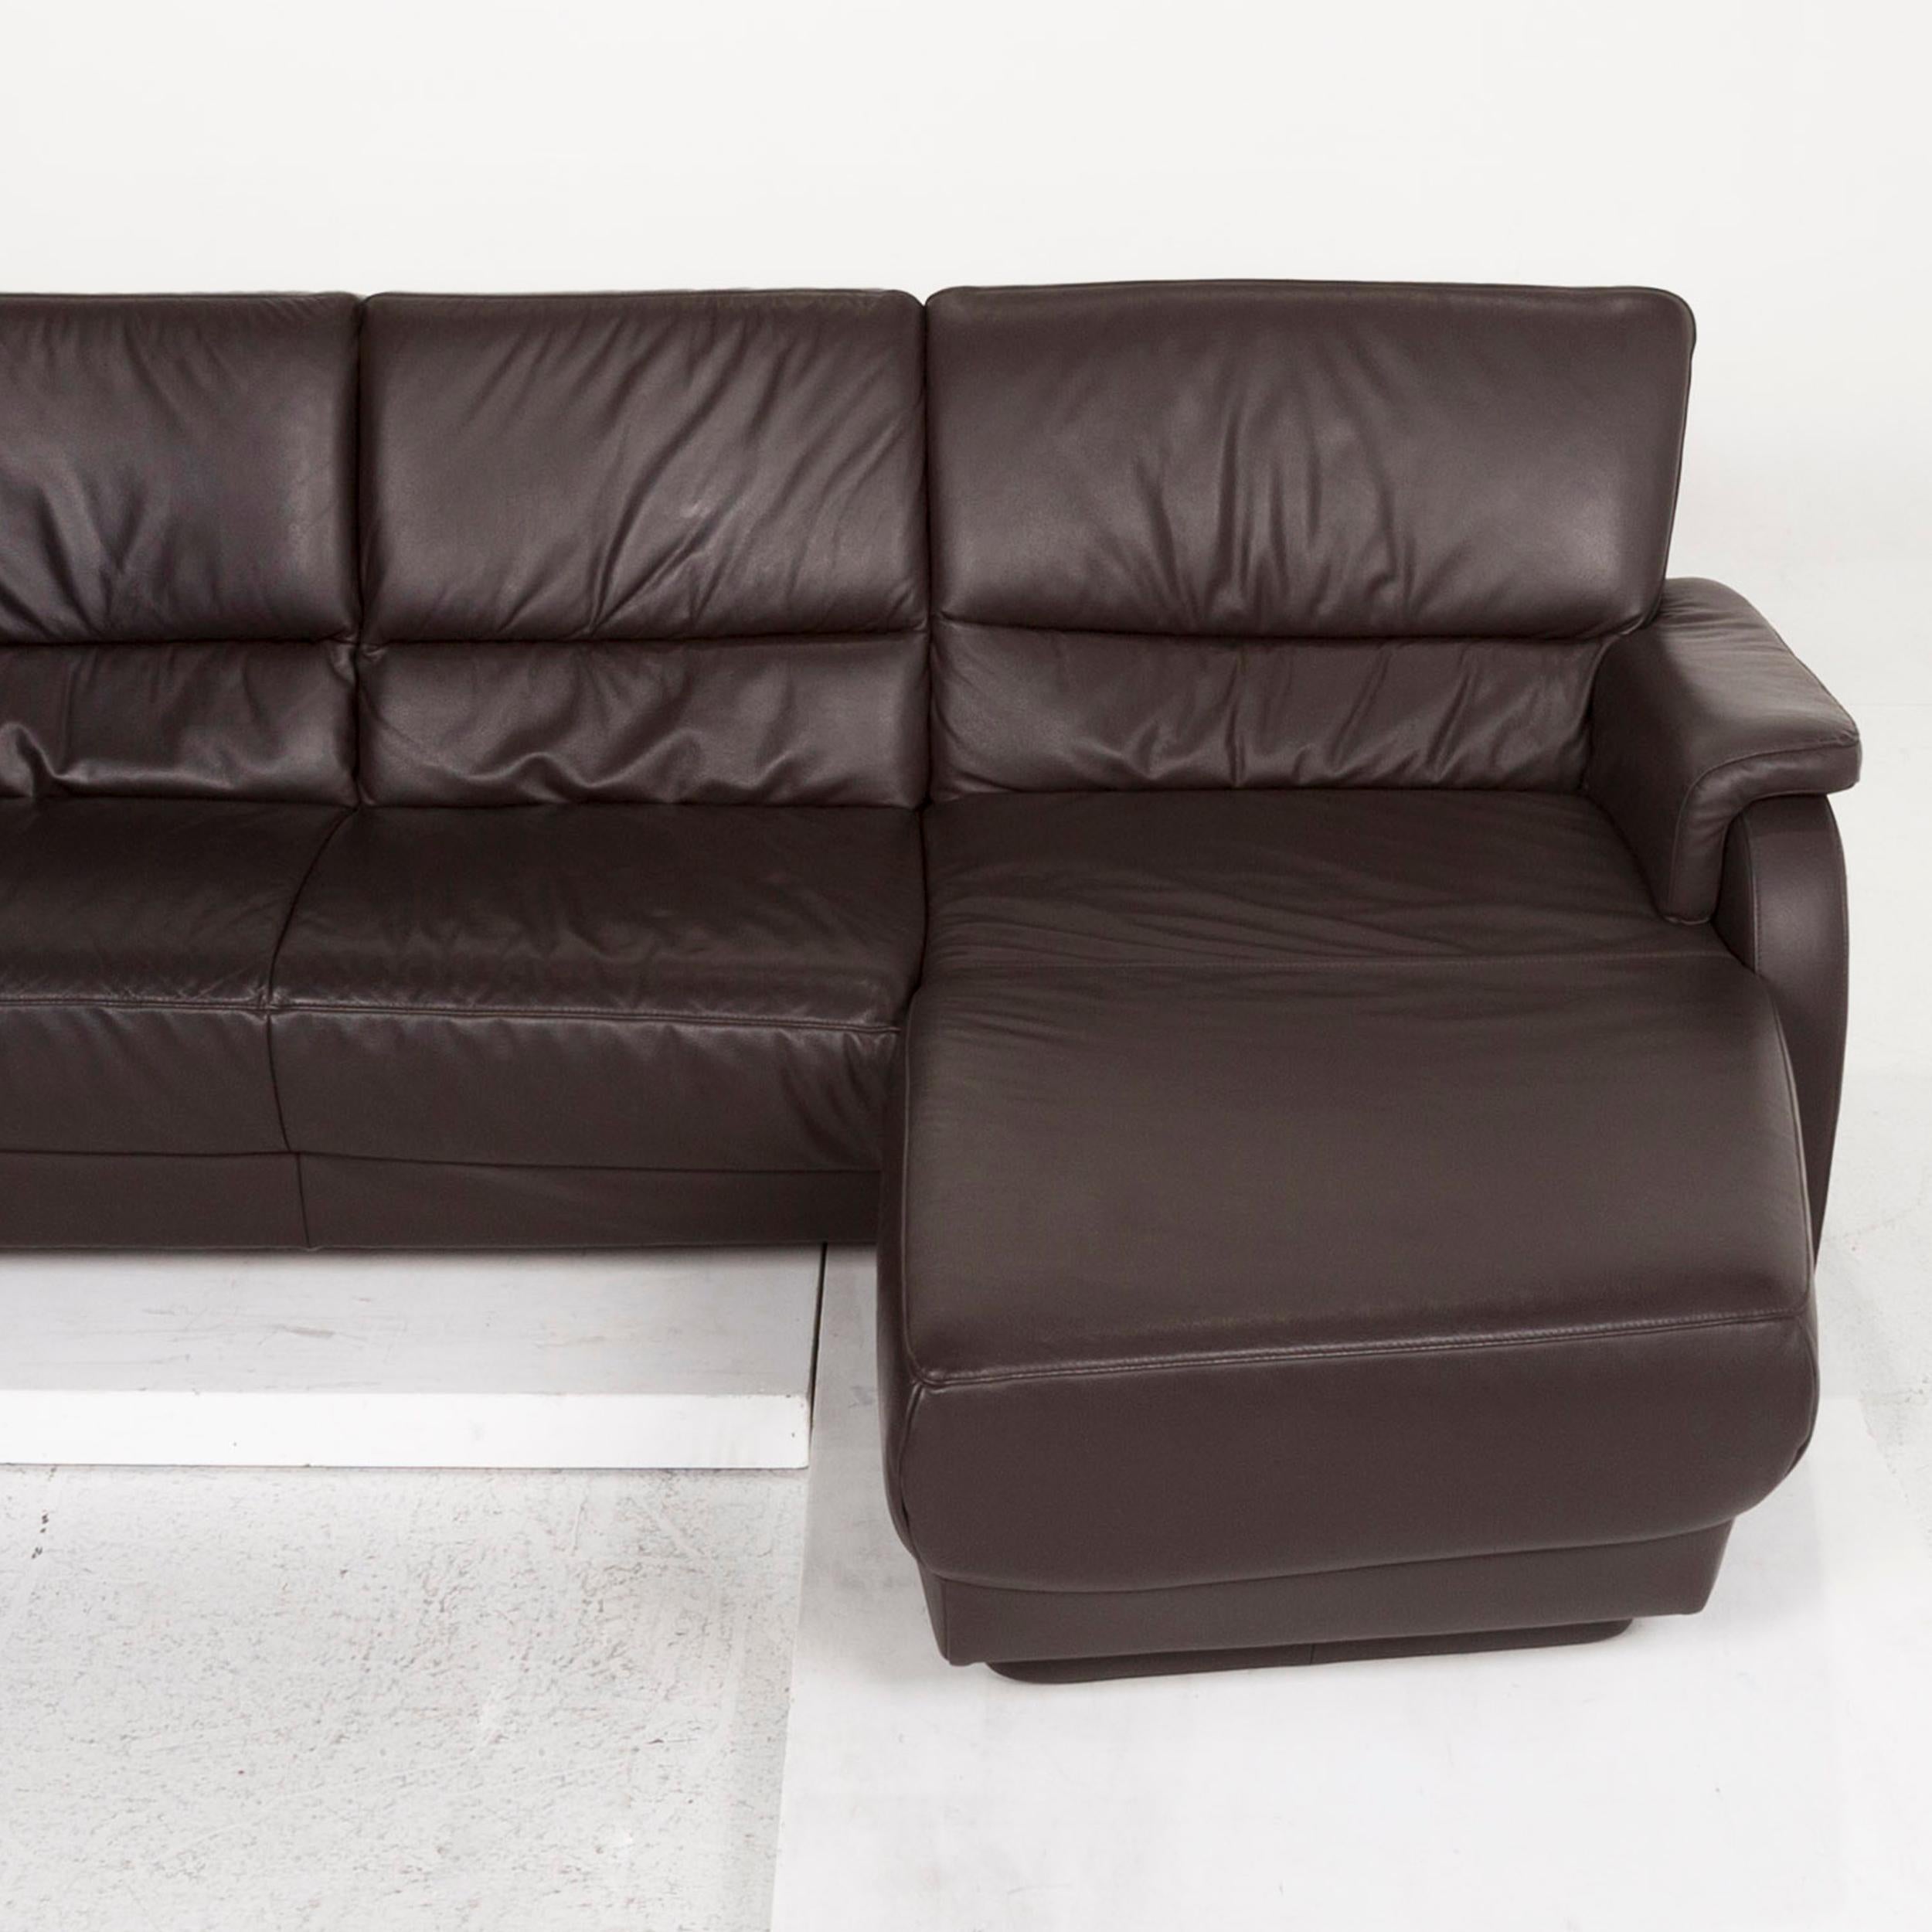 Himolla Leather Corner Sofa Brown Dark Brown Couch In Good Condition For Sale In Cologne, DE